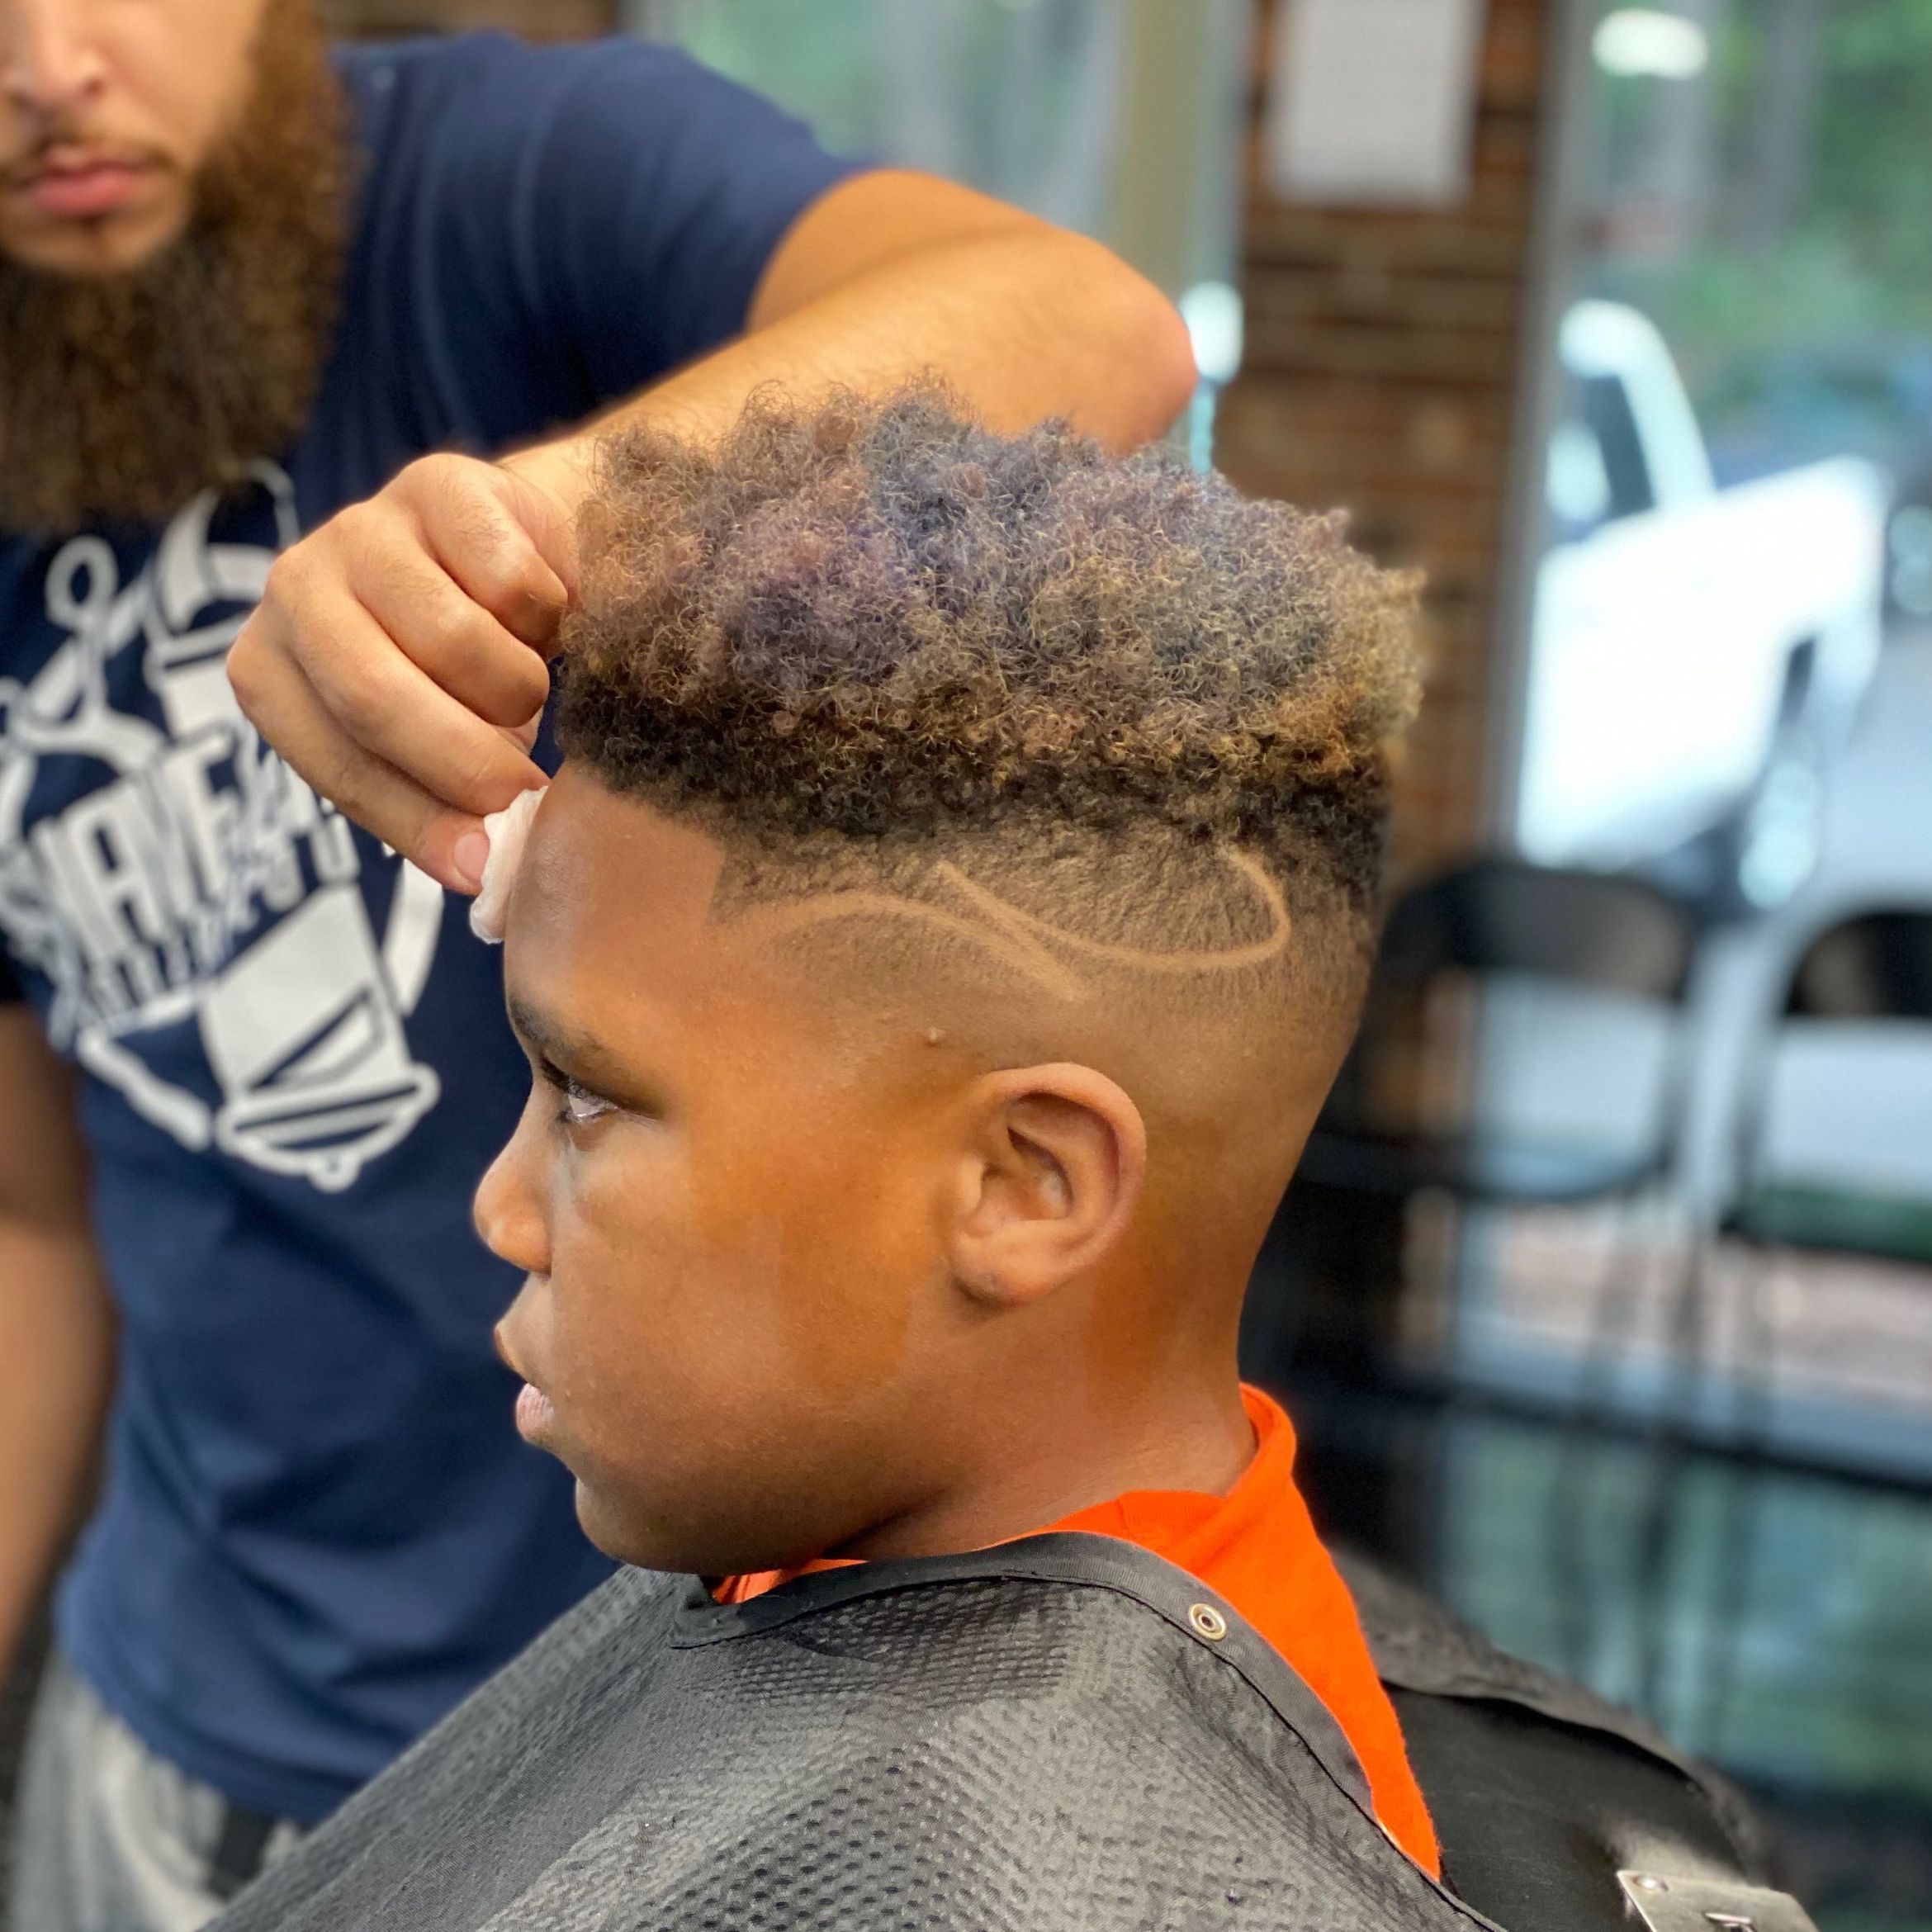 Kids Haircut (11 yrs old and under) portfolio